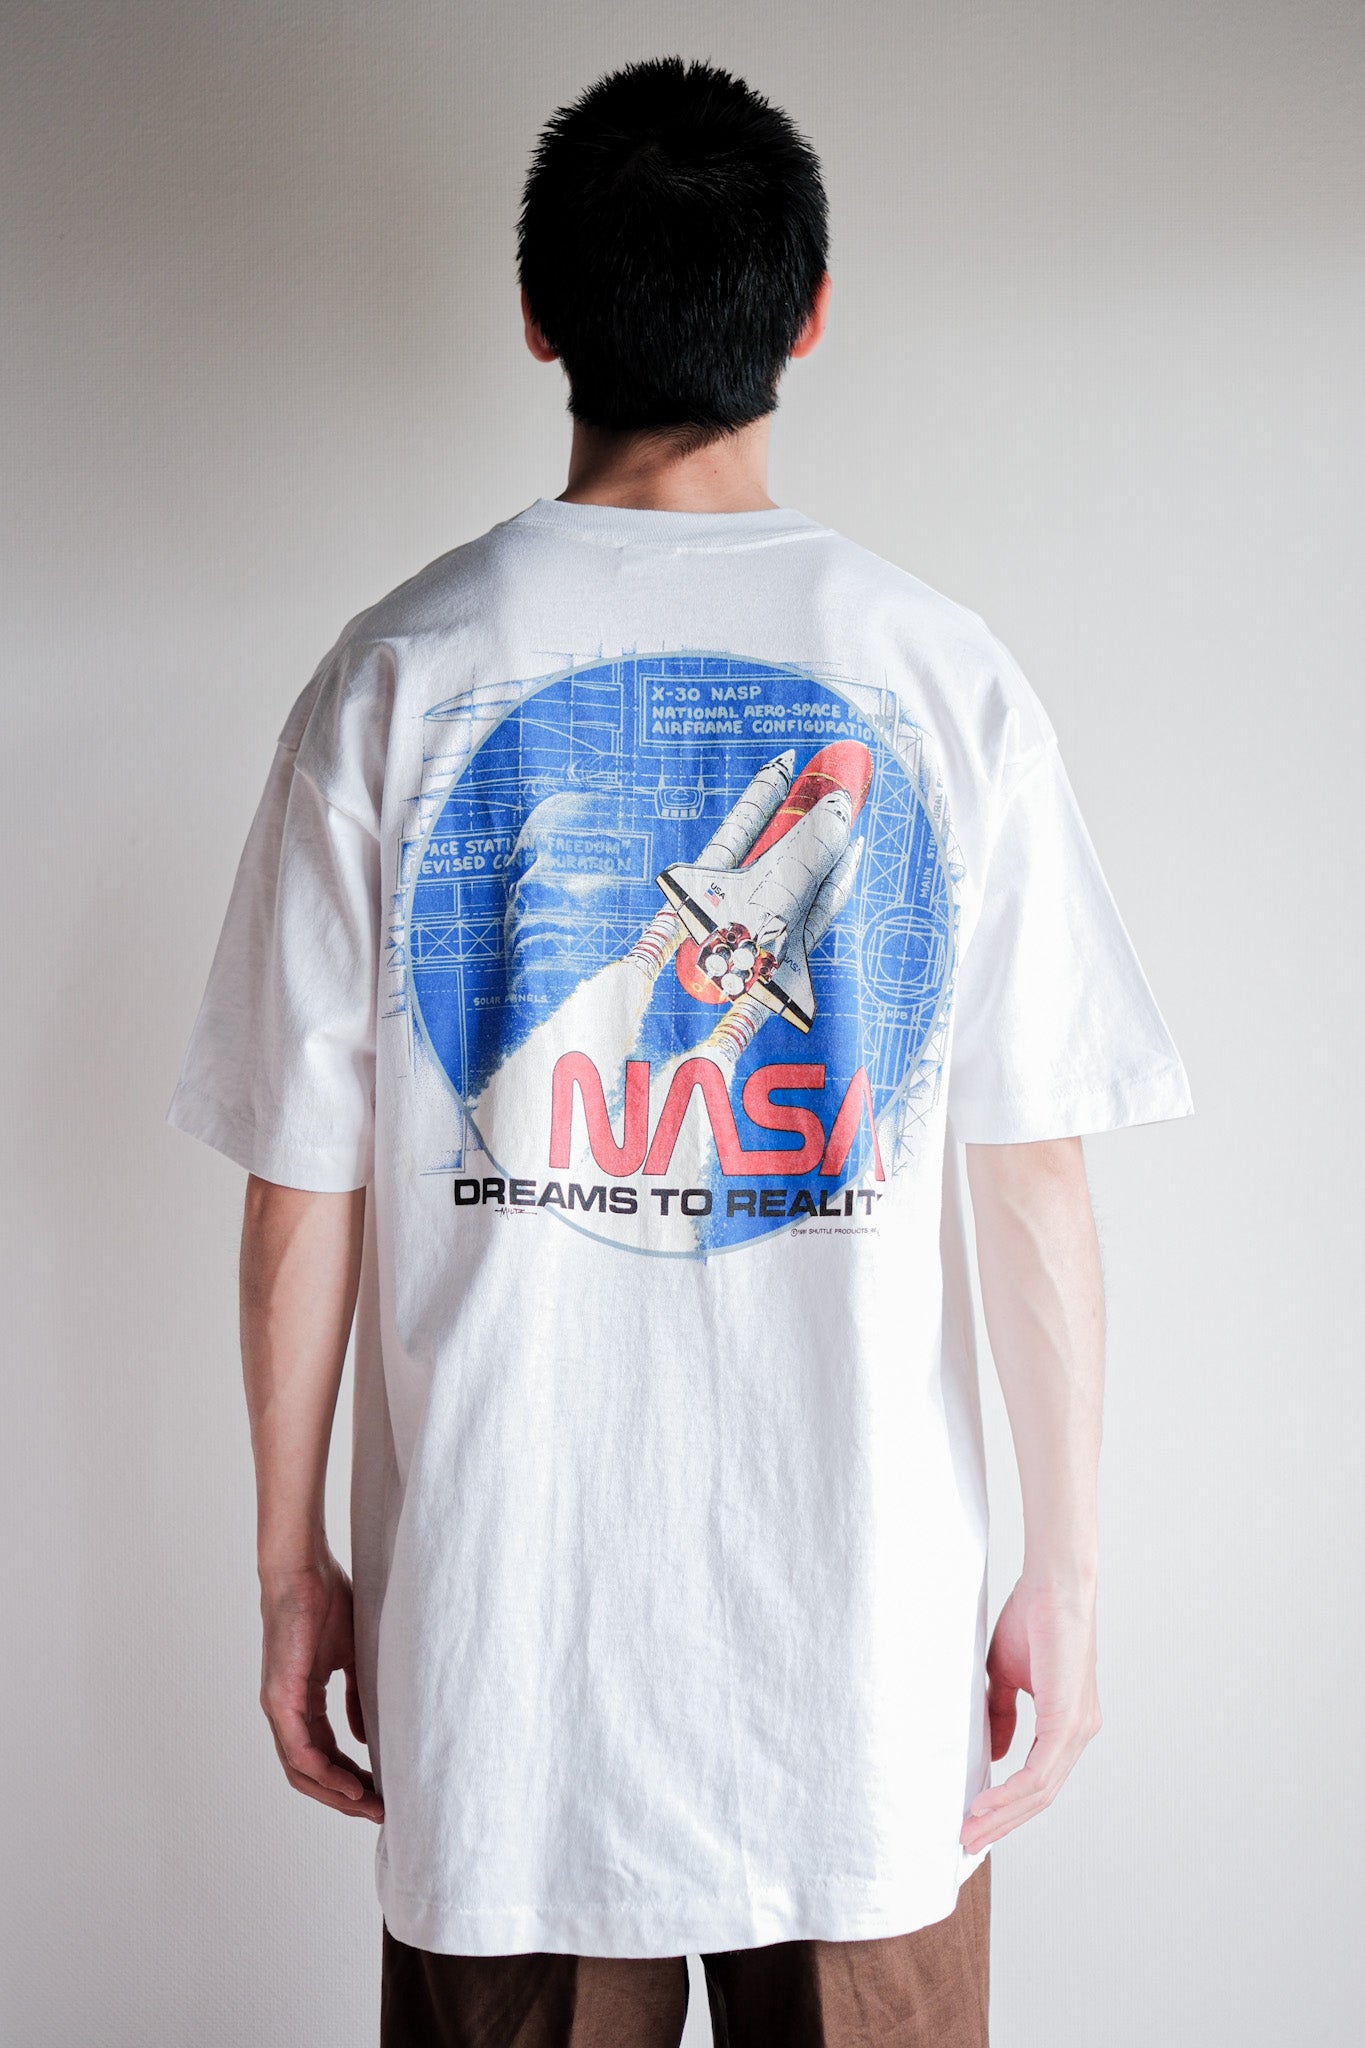 [~ 90's] Vintage Federal Print T-Shirt Size.xl "Nasa" "Made in U.S.A."